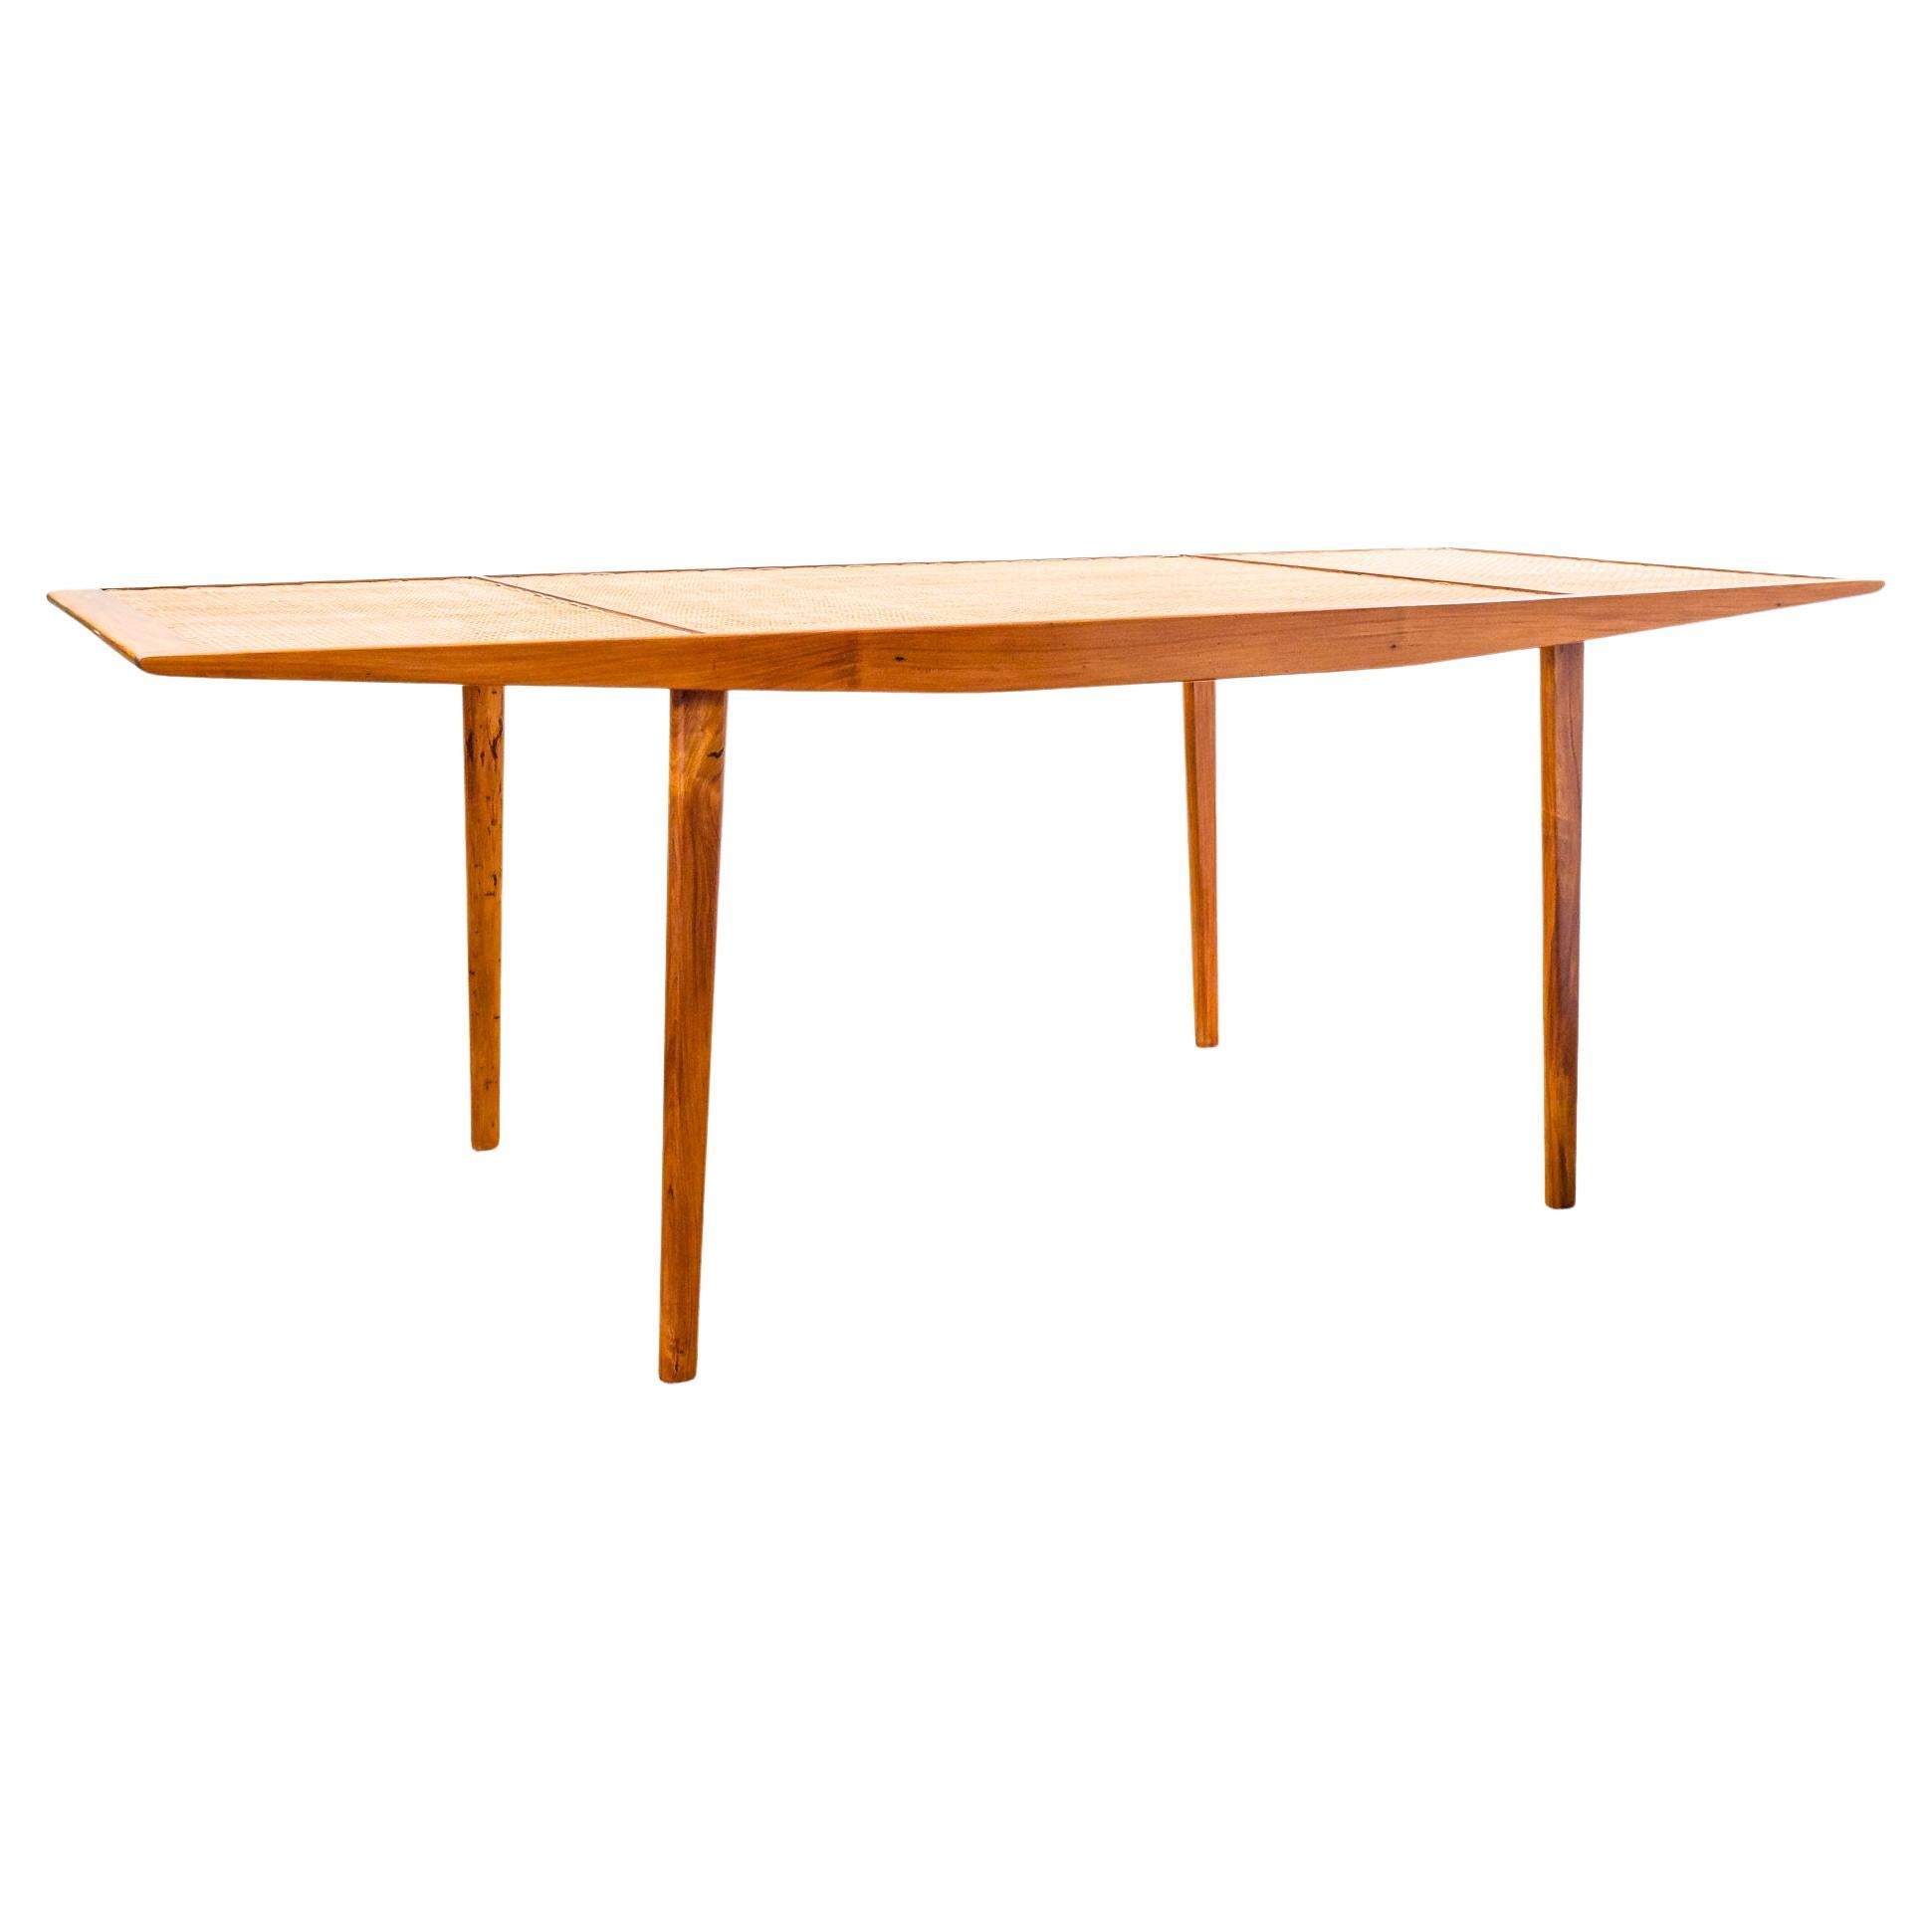 Dining Table in Caviuna and Cane Weaving by Martin Eisler, Brazil Modern, 1950s For Sale